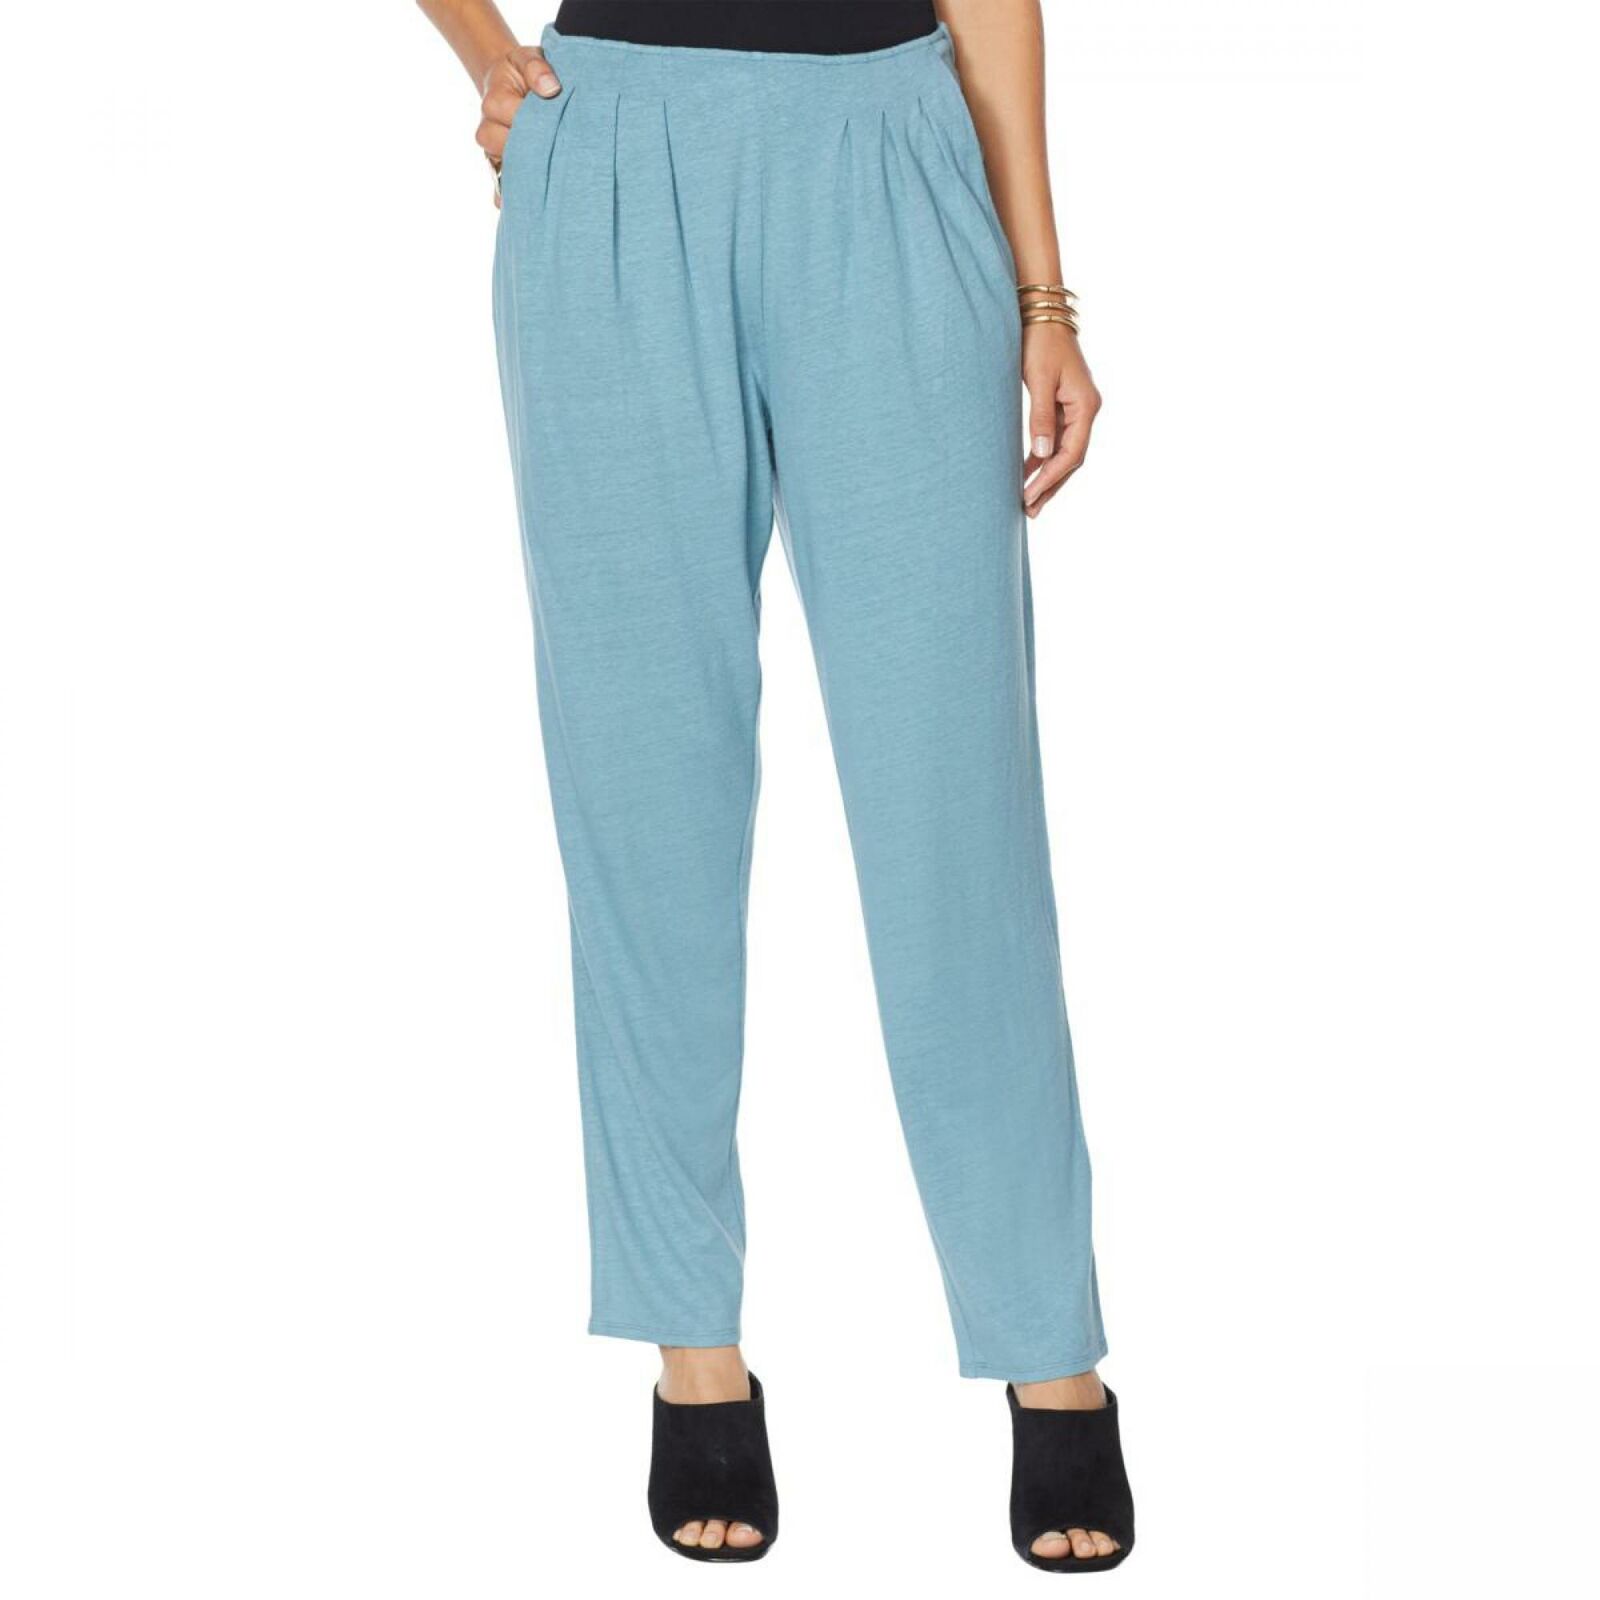 NWT MarlaWynne Womens Pull-On Linen Jersey Slouch Ankle Pant. 693826 | eBay